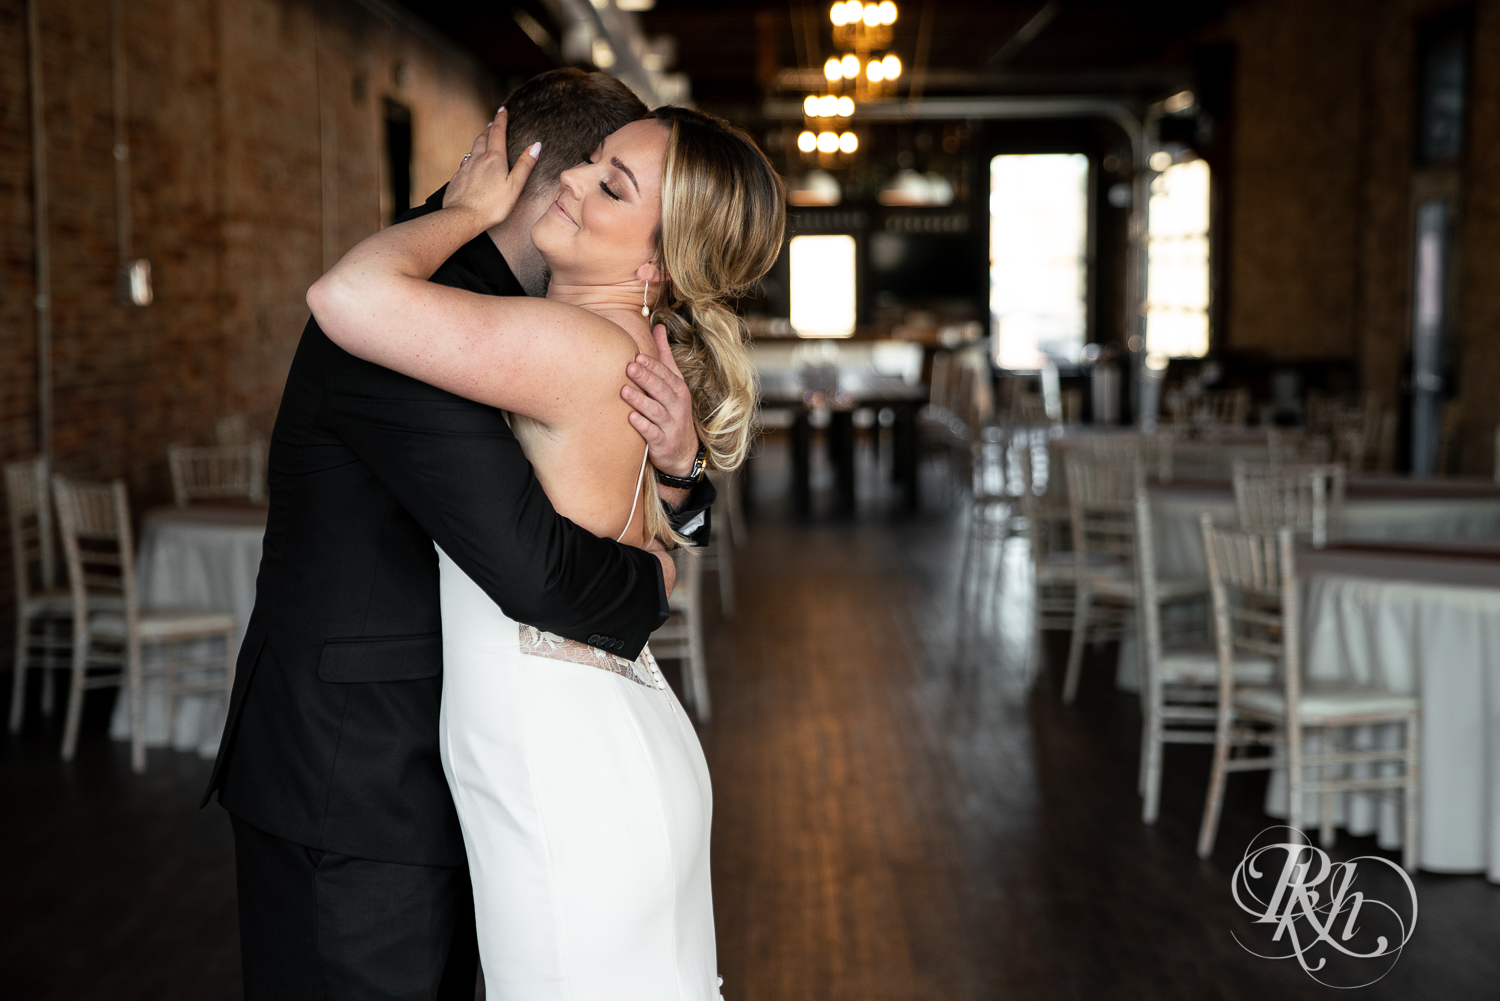 Bride and groom share first look at the 3 Ten Event Center in Faribault, Minnesota.